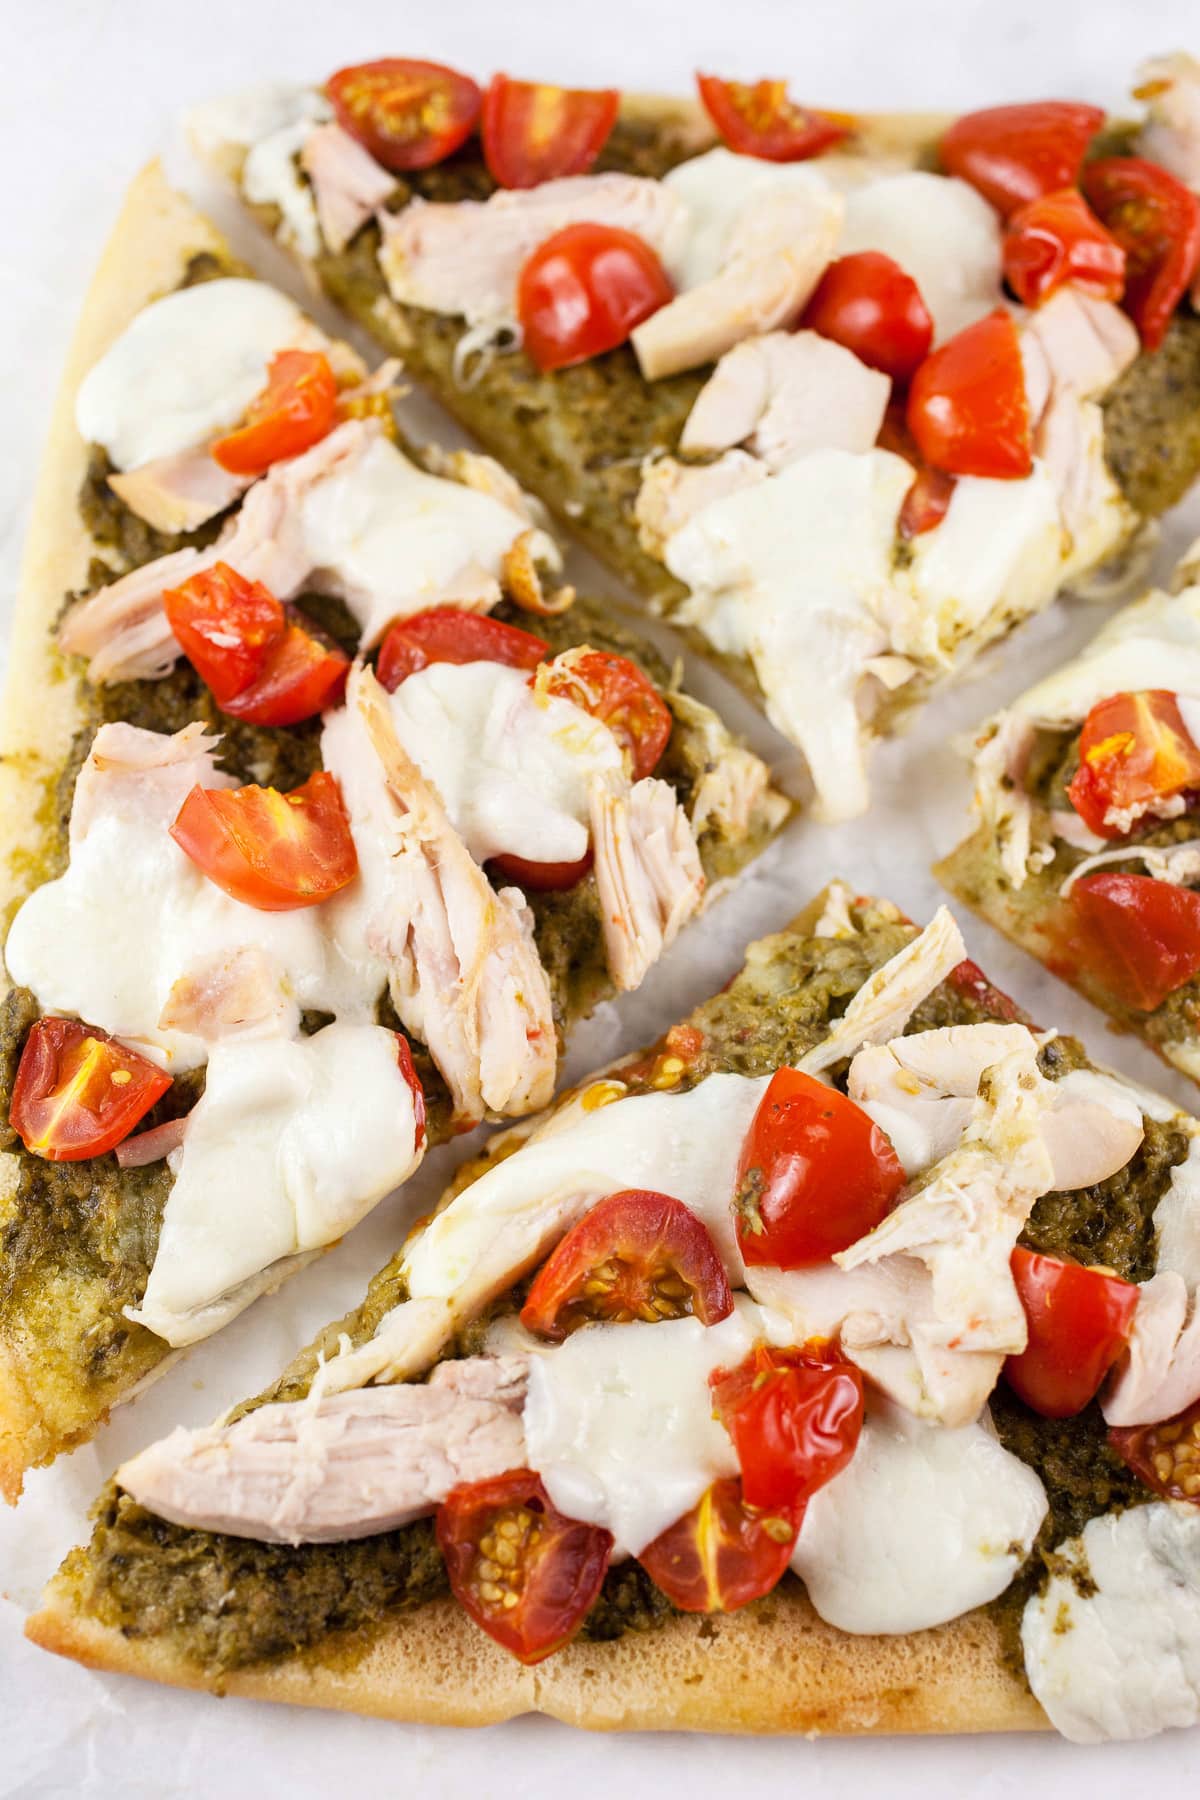 Cooked chicken pesto flatbread cut into slices on white surface.